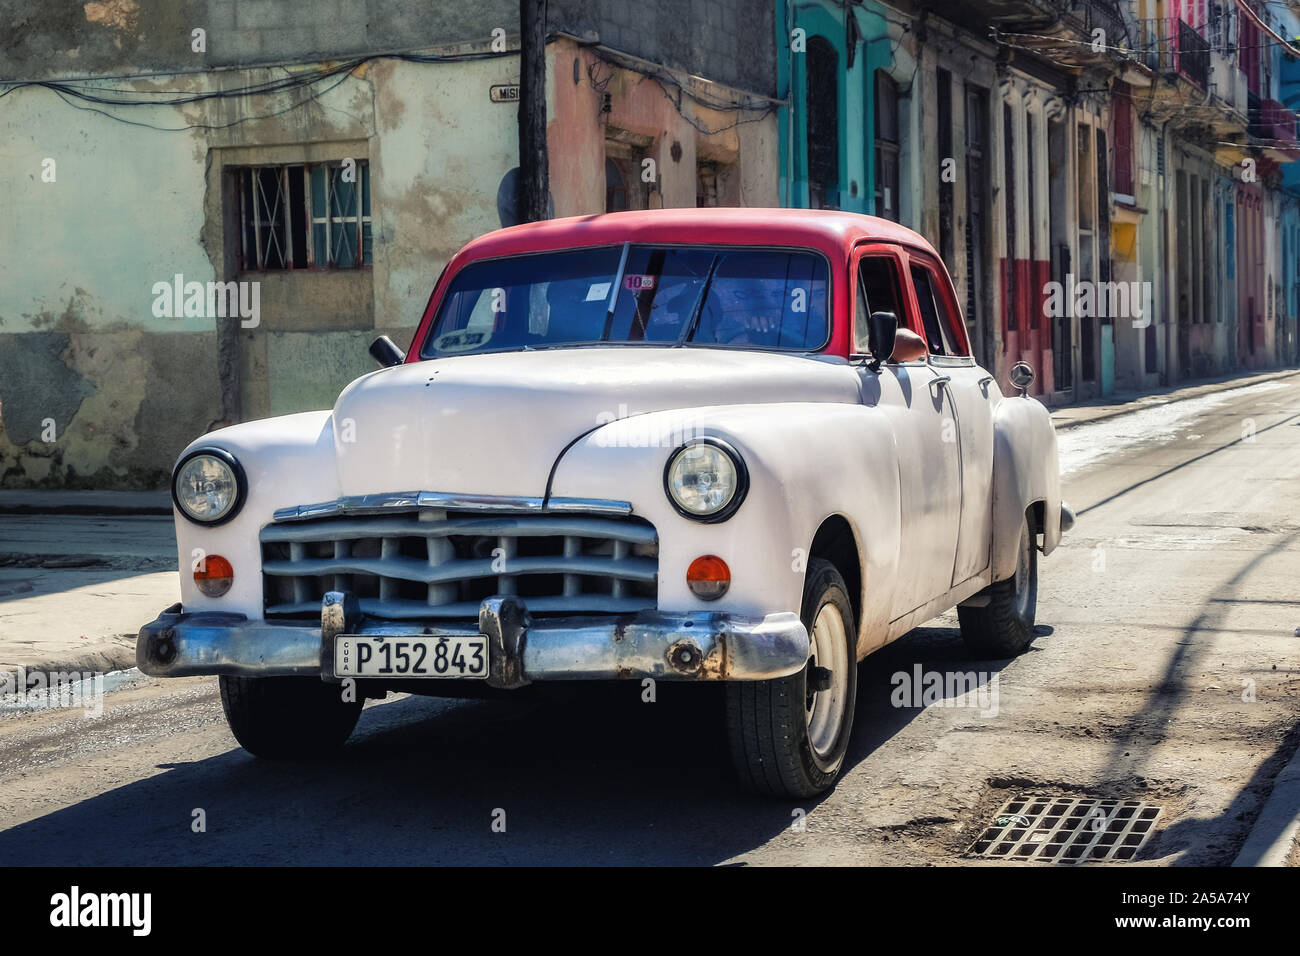 Street Scene with white and red Vintage Classic American Car, Havana, Cuba Stock Photo